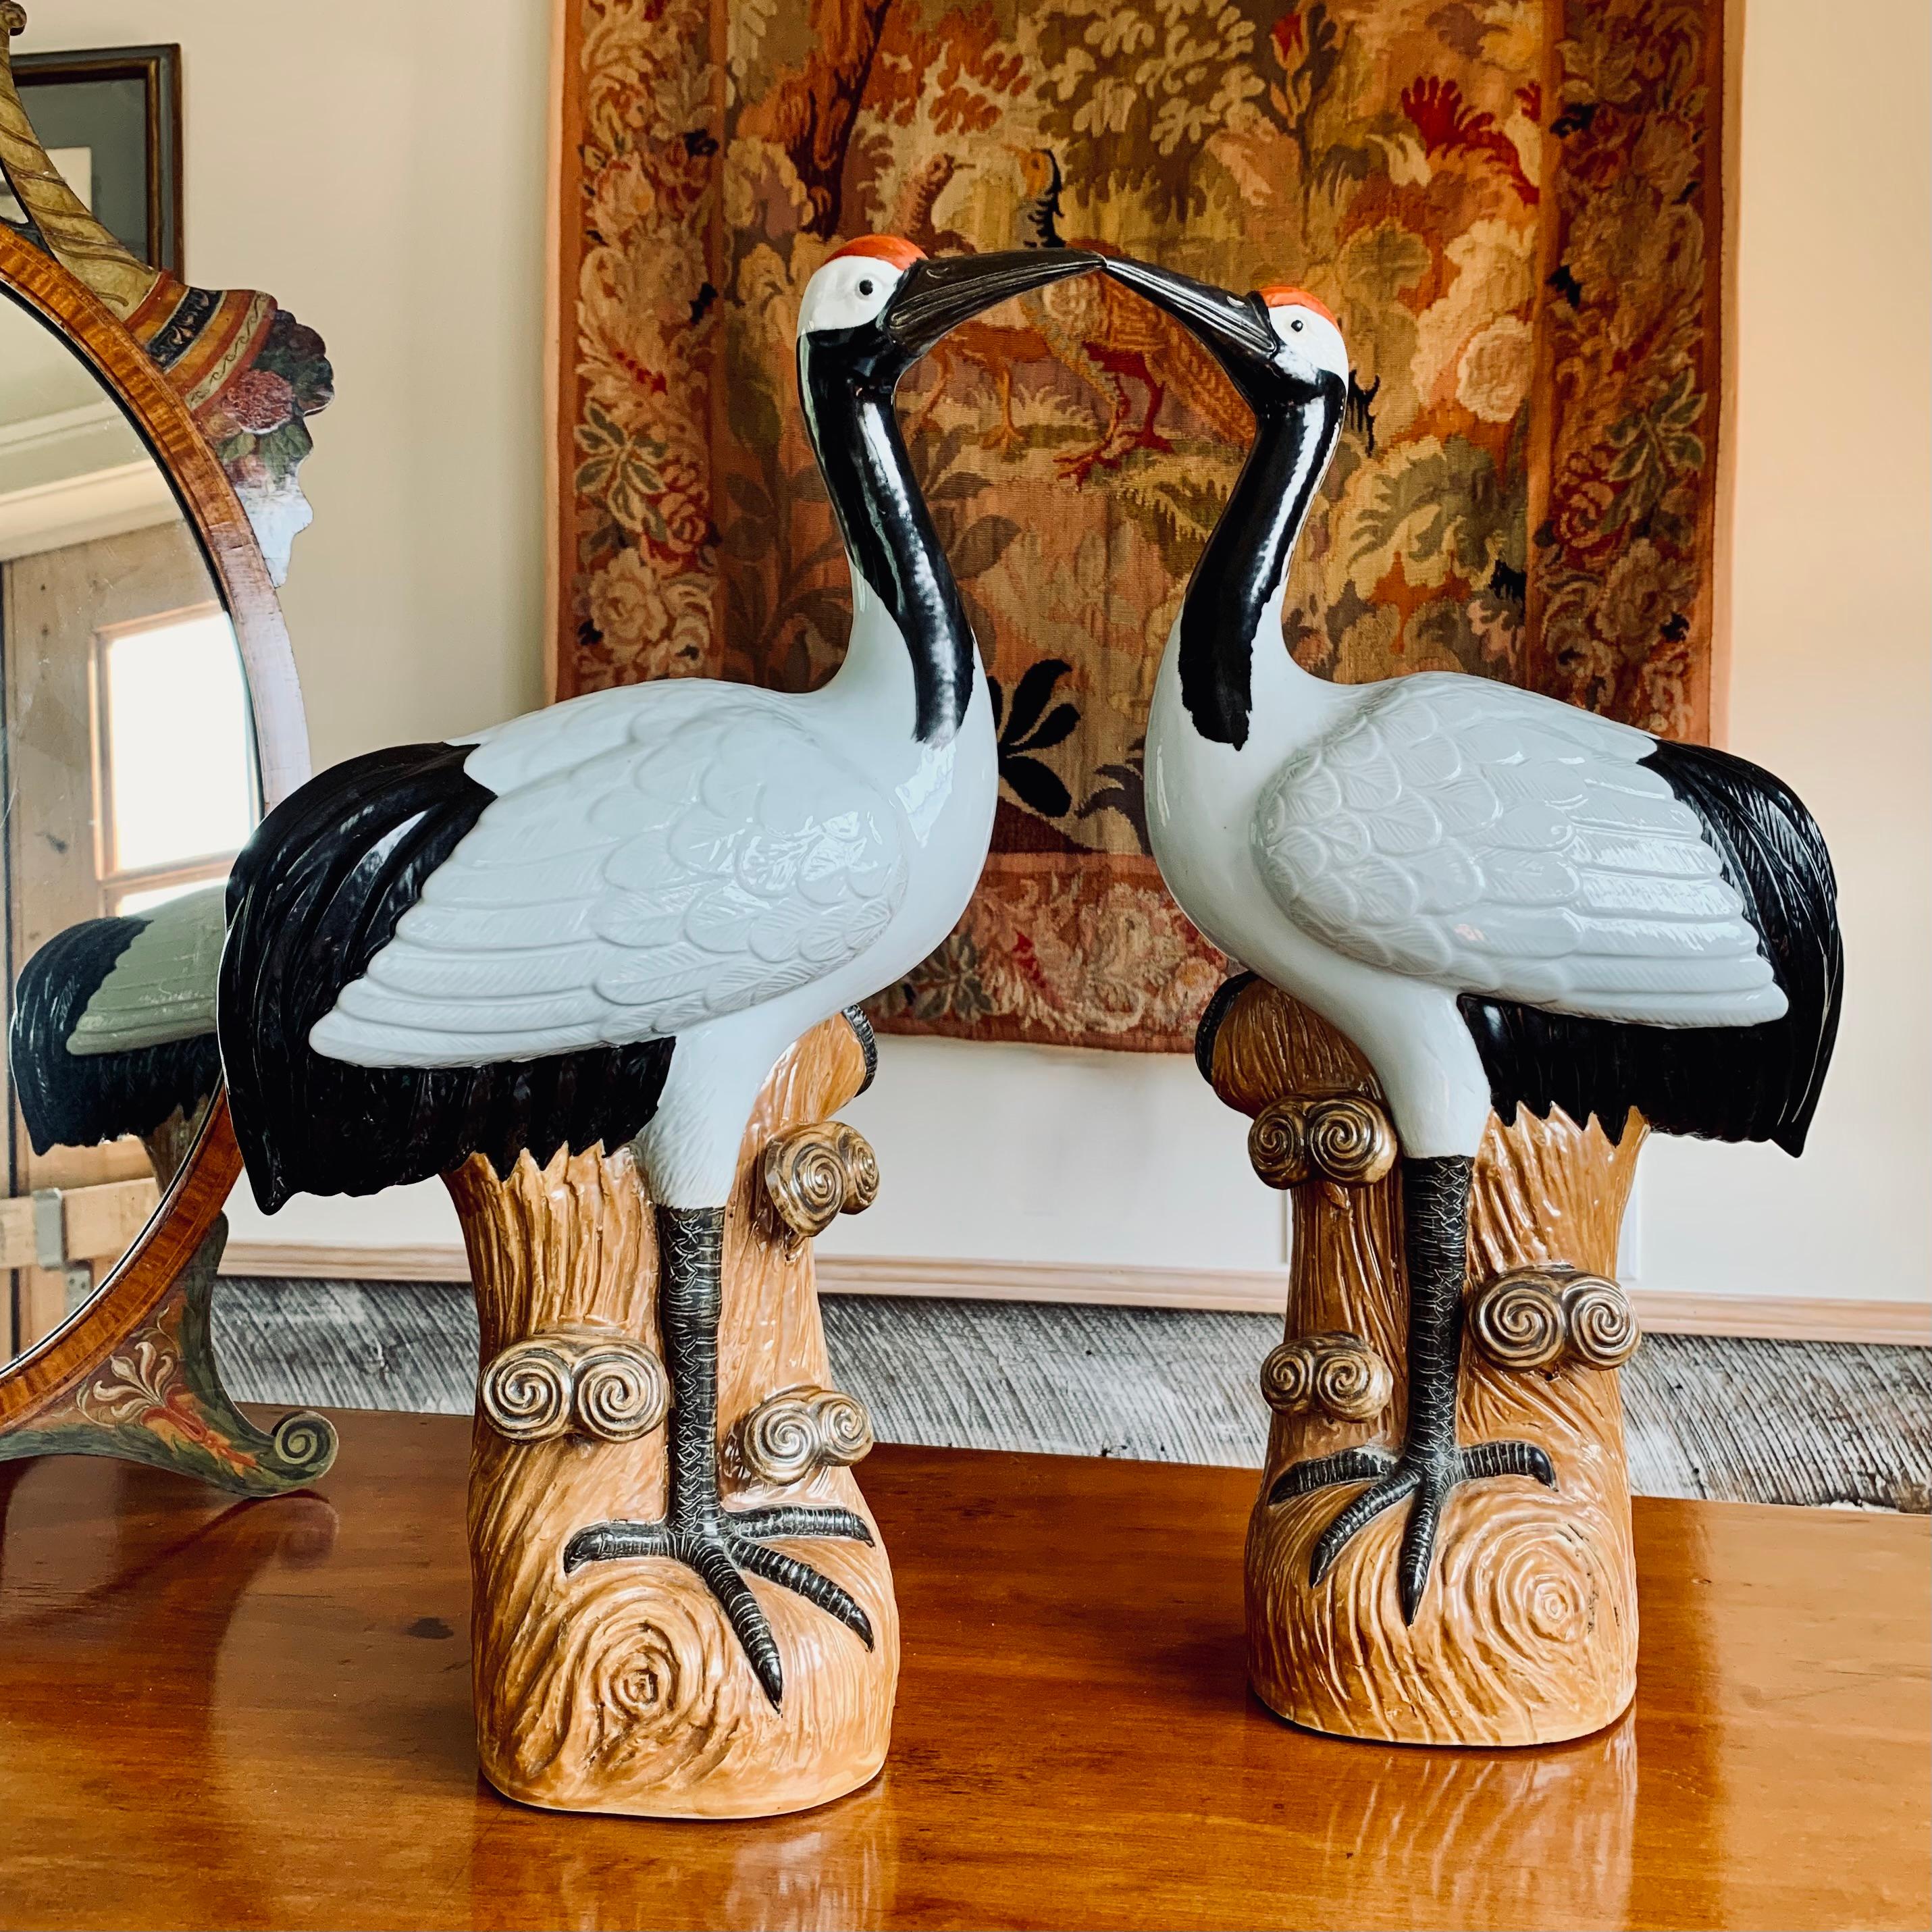 A large and striking pair of porcelain cranes, modeled in beautiful and precise detail: feathers, legs, the imaginative “wood” of the porcelain stumps they stand on are all exquisitely textured. The real red-crowned crane is a rare and very large